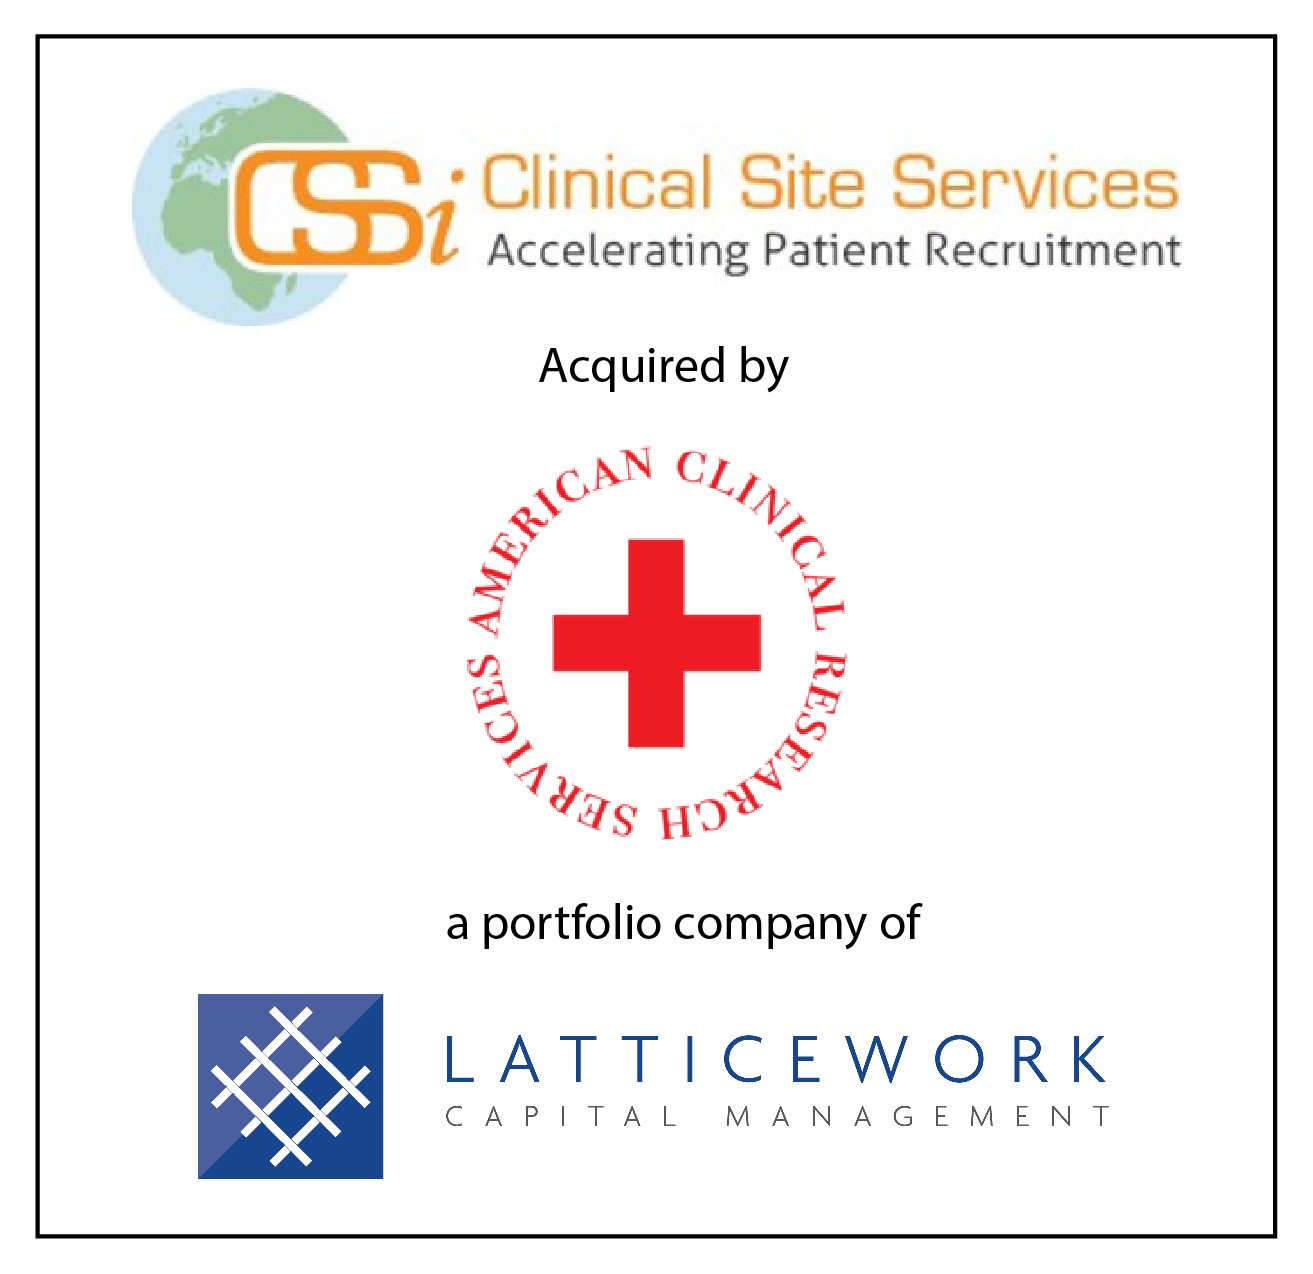 Clinical Site Services and Patient Advertising Guru Acquired by American Clinical Research Services to Add Tech-Enabled Patient Recruitment Capabilities